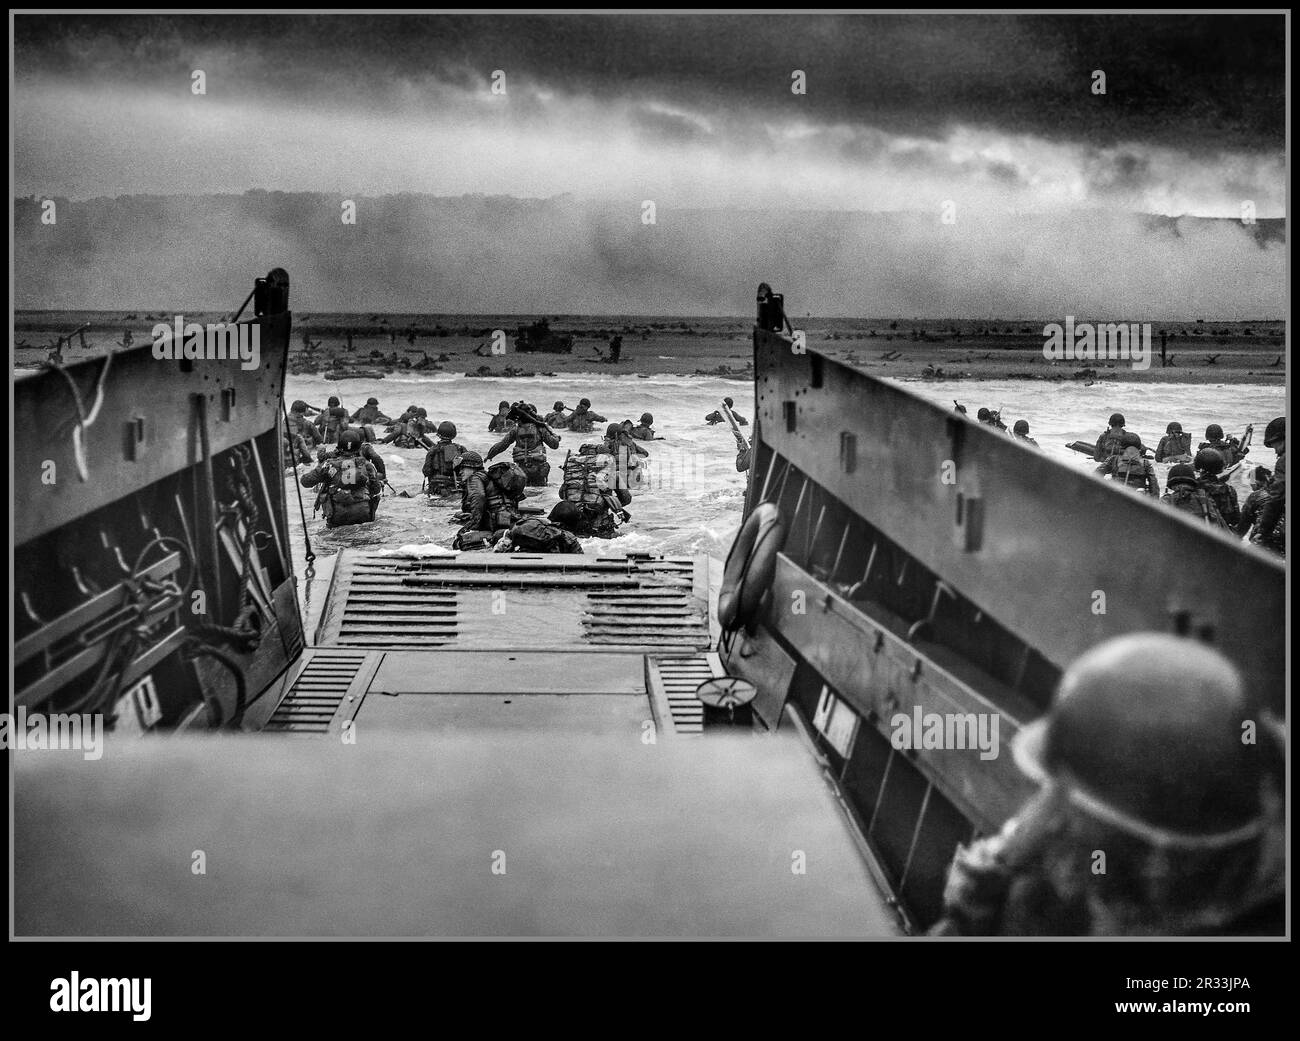 D-DAY UTAH BEACH WW2 Normandy landings  the landing craft boat landing operations on 6 June 1944 (termed D-Day) of the Allied invasion of Nazi Germany occupied Normandy France A LCVP (Landing Craft, Vehicle, Personnel) from the U.S. Coast Guard-manned USS Samuel Chase disembarks troops of Company A, 16th Infantry, 1st Infantry Division wading onto the Fox Green section of Omaha Beach (Calvados, Basse-Normandie, France) on morning of June 6, 1944. American soldiers encountered the newly formed German 352nd Division when landing. Stock Photo